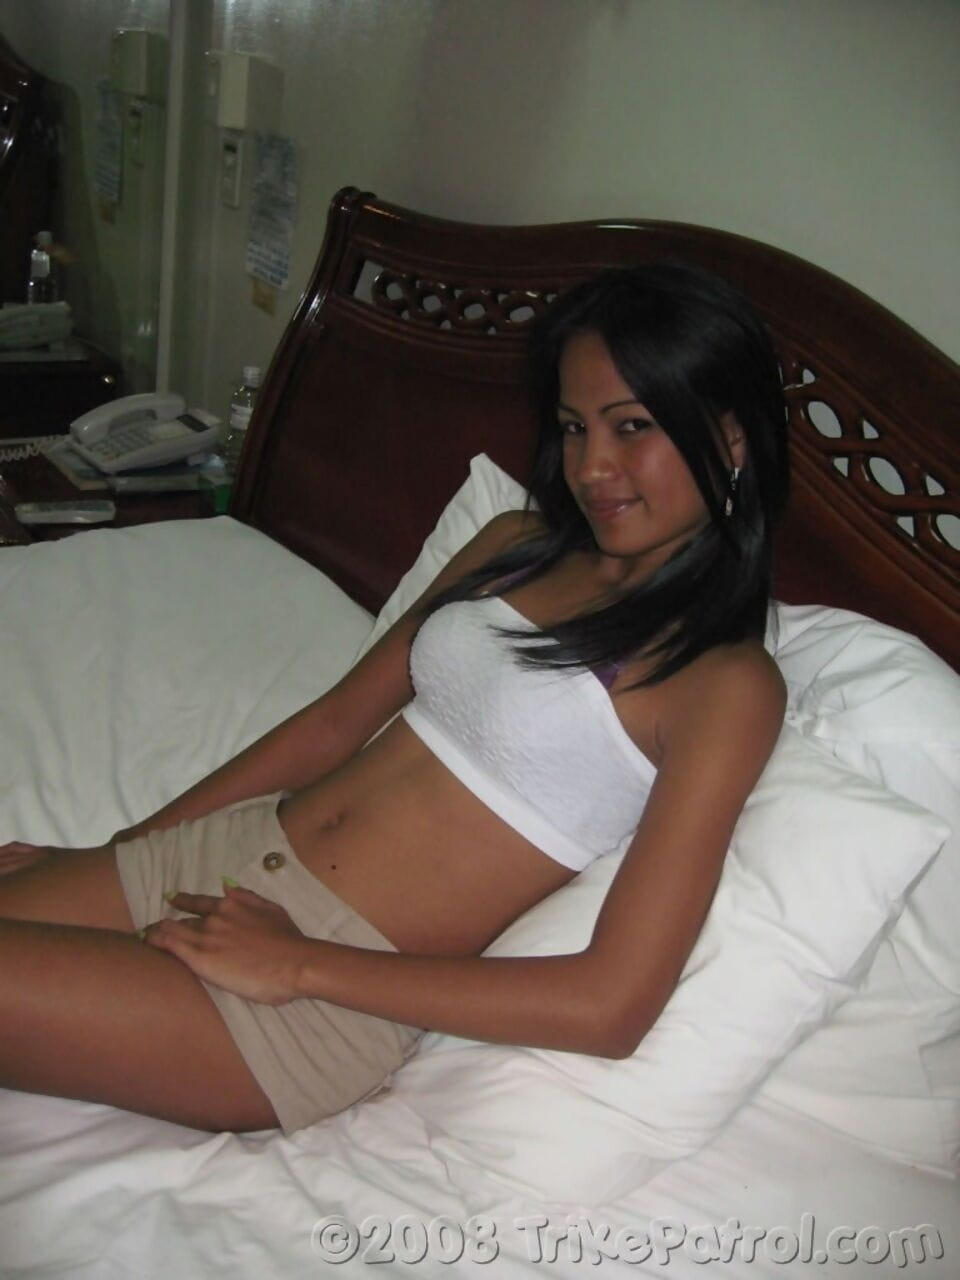 Appealing petite Filipina Linda strips nude to spread wide & suck cock page 1